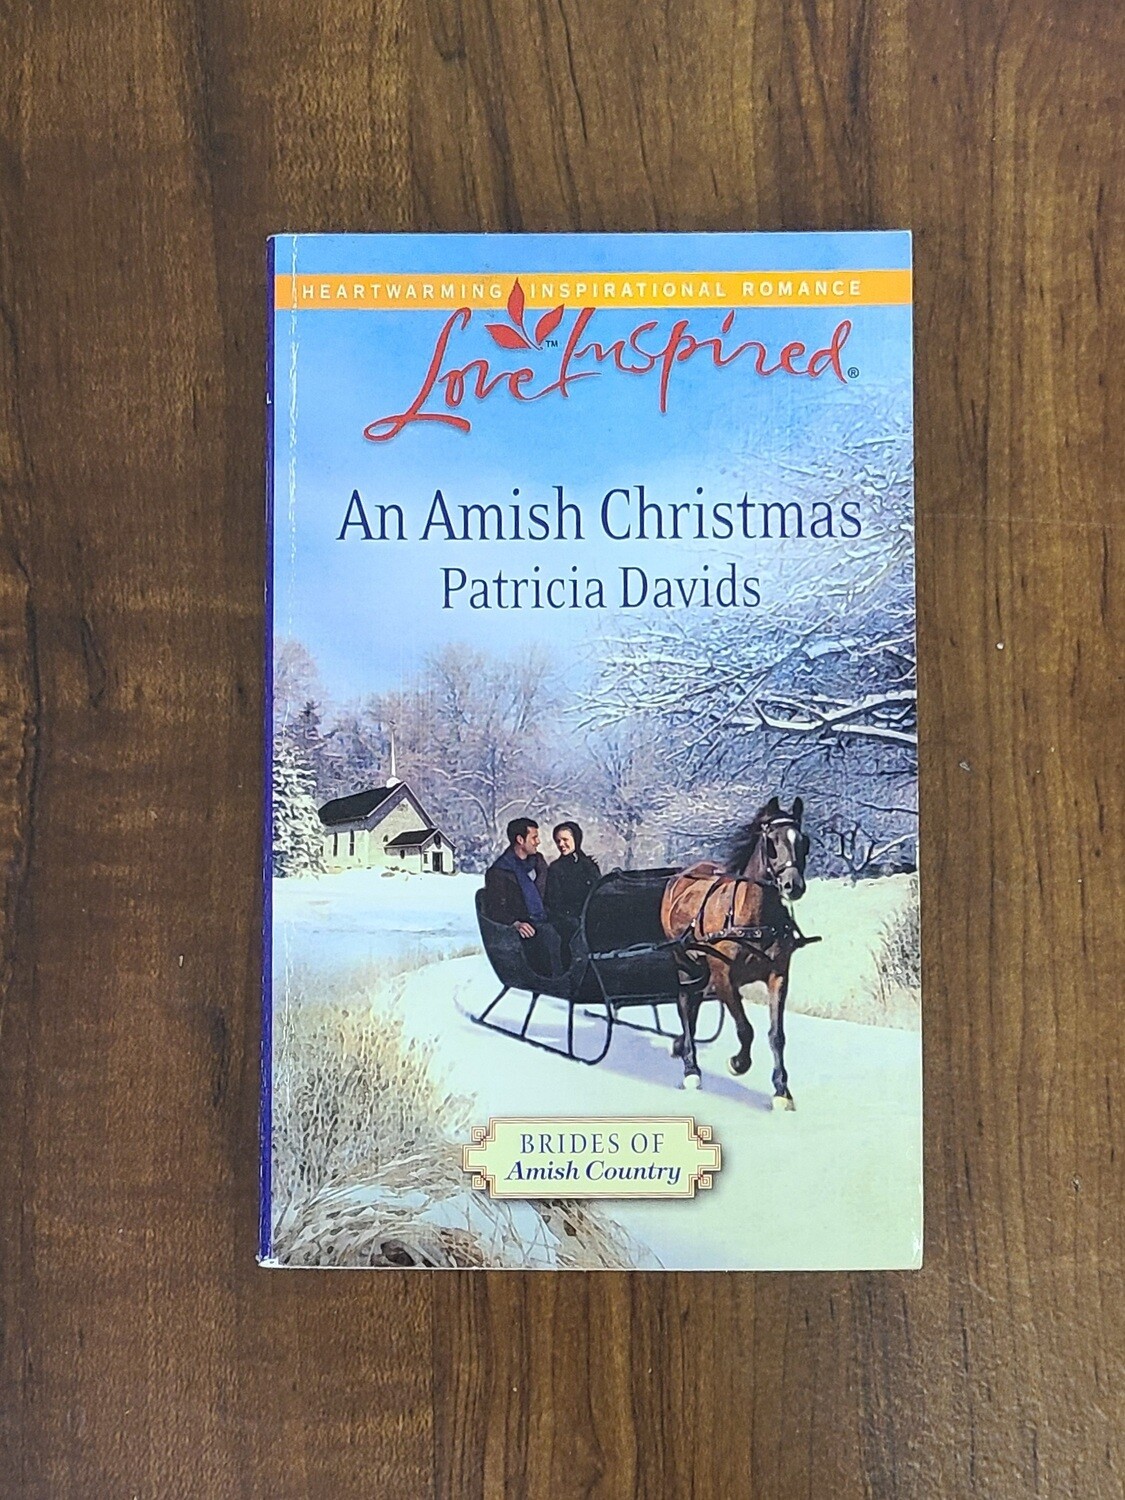 An Amish Christmas by Patricia Davids